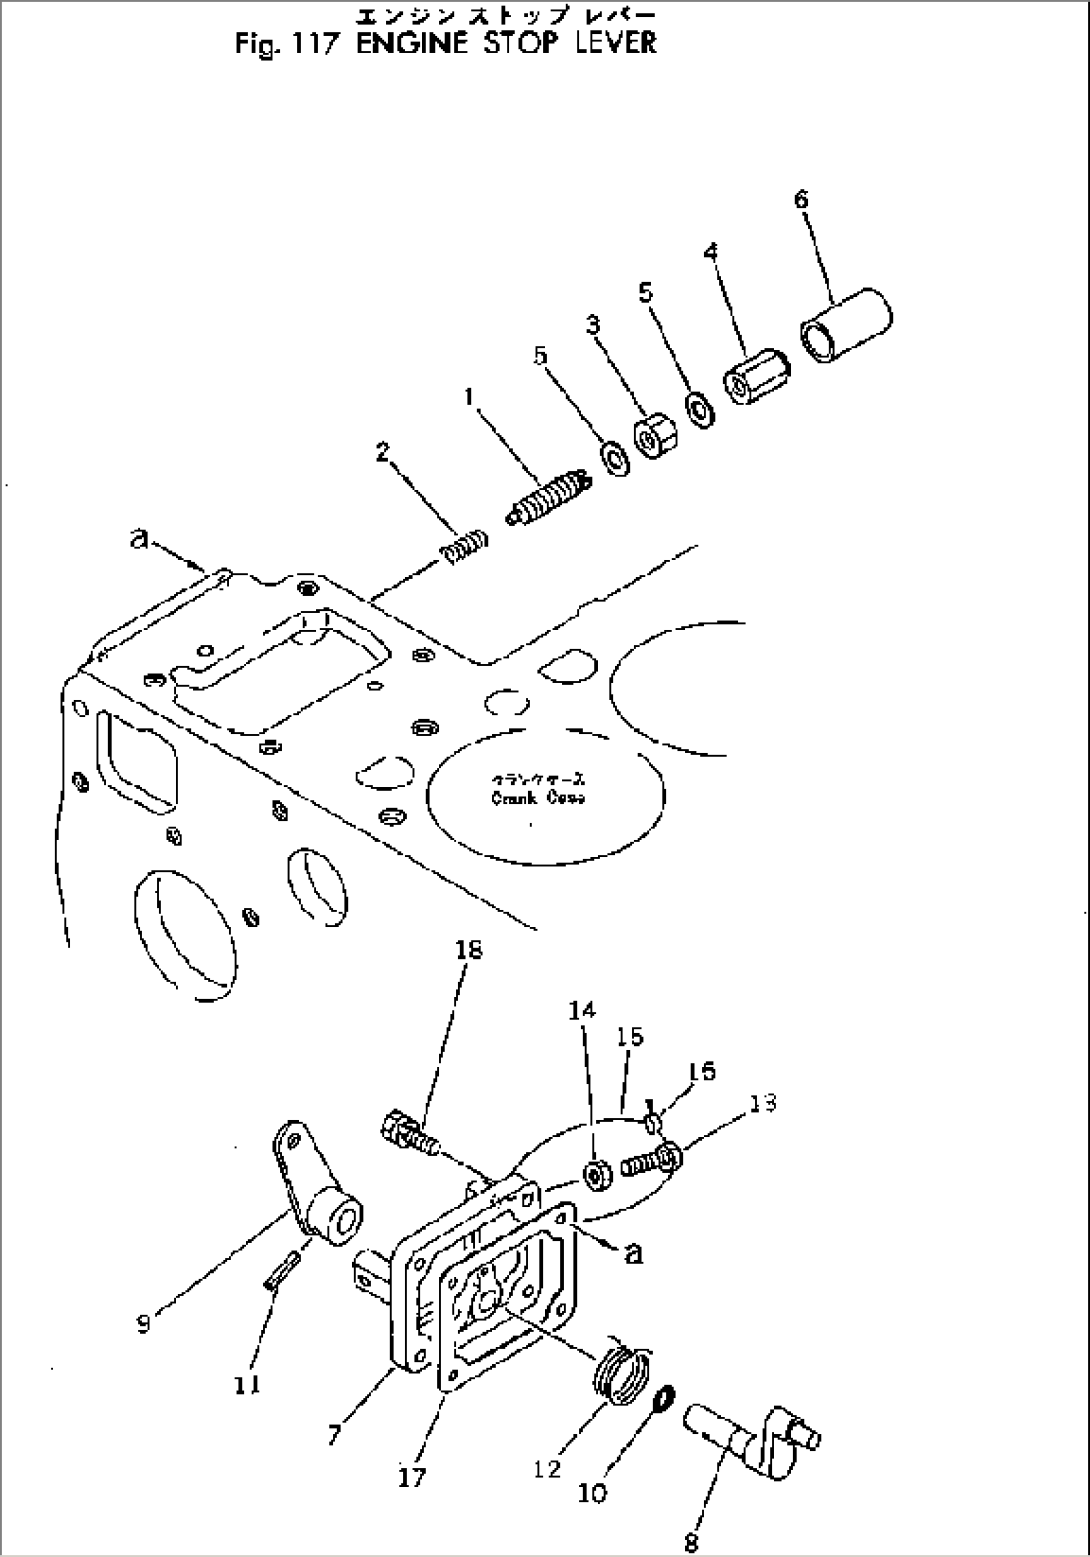 ENGINE STOP LEVER